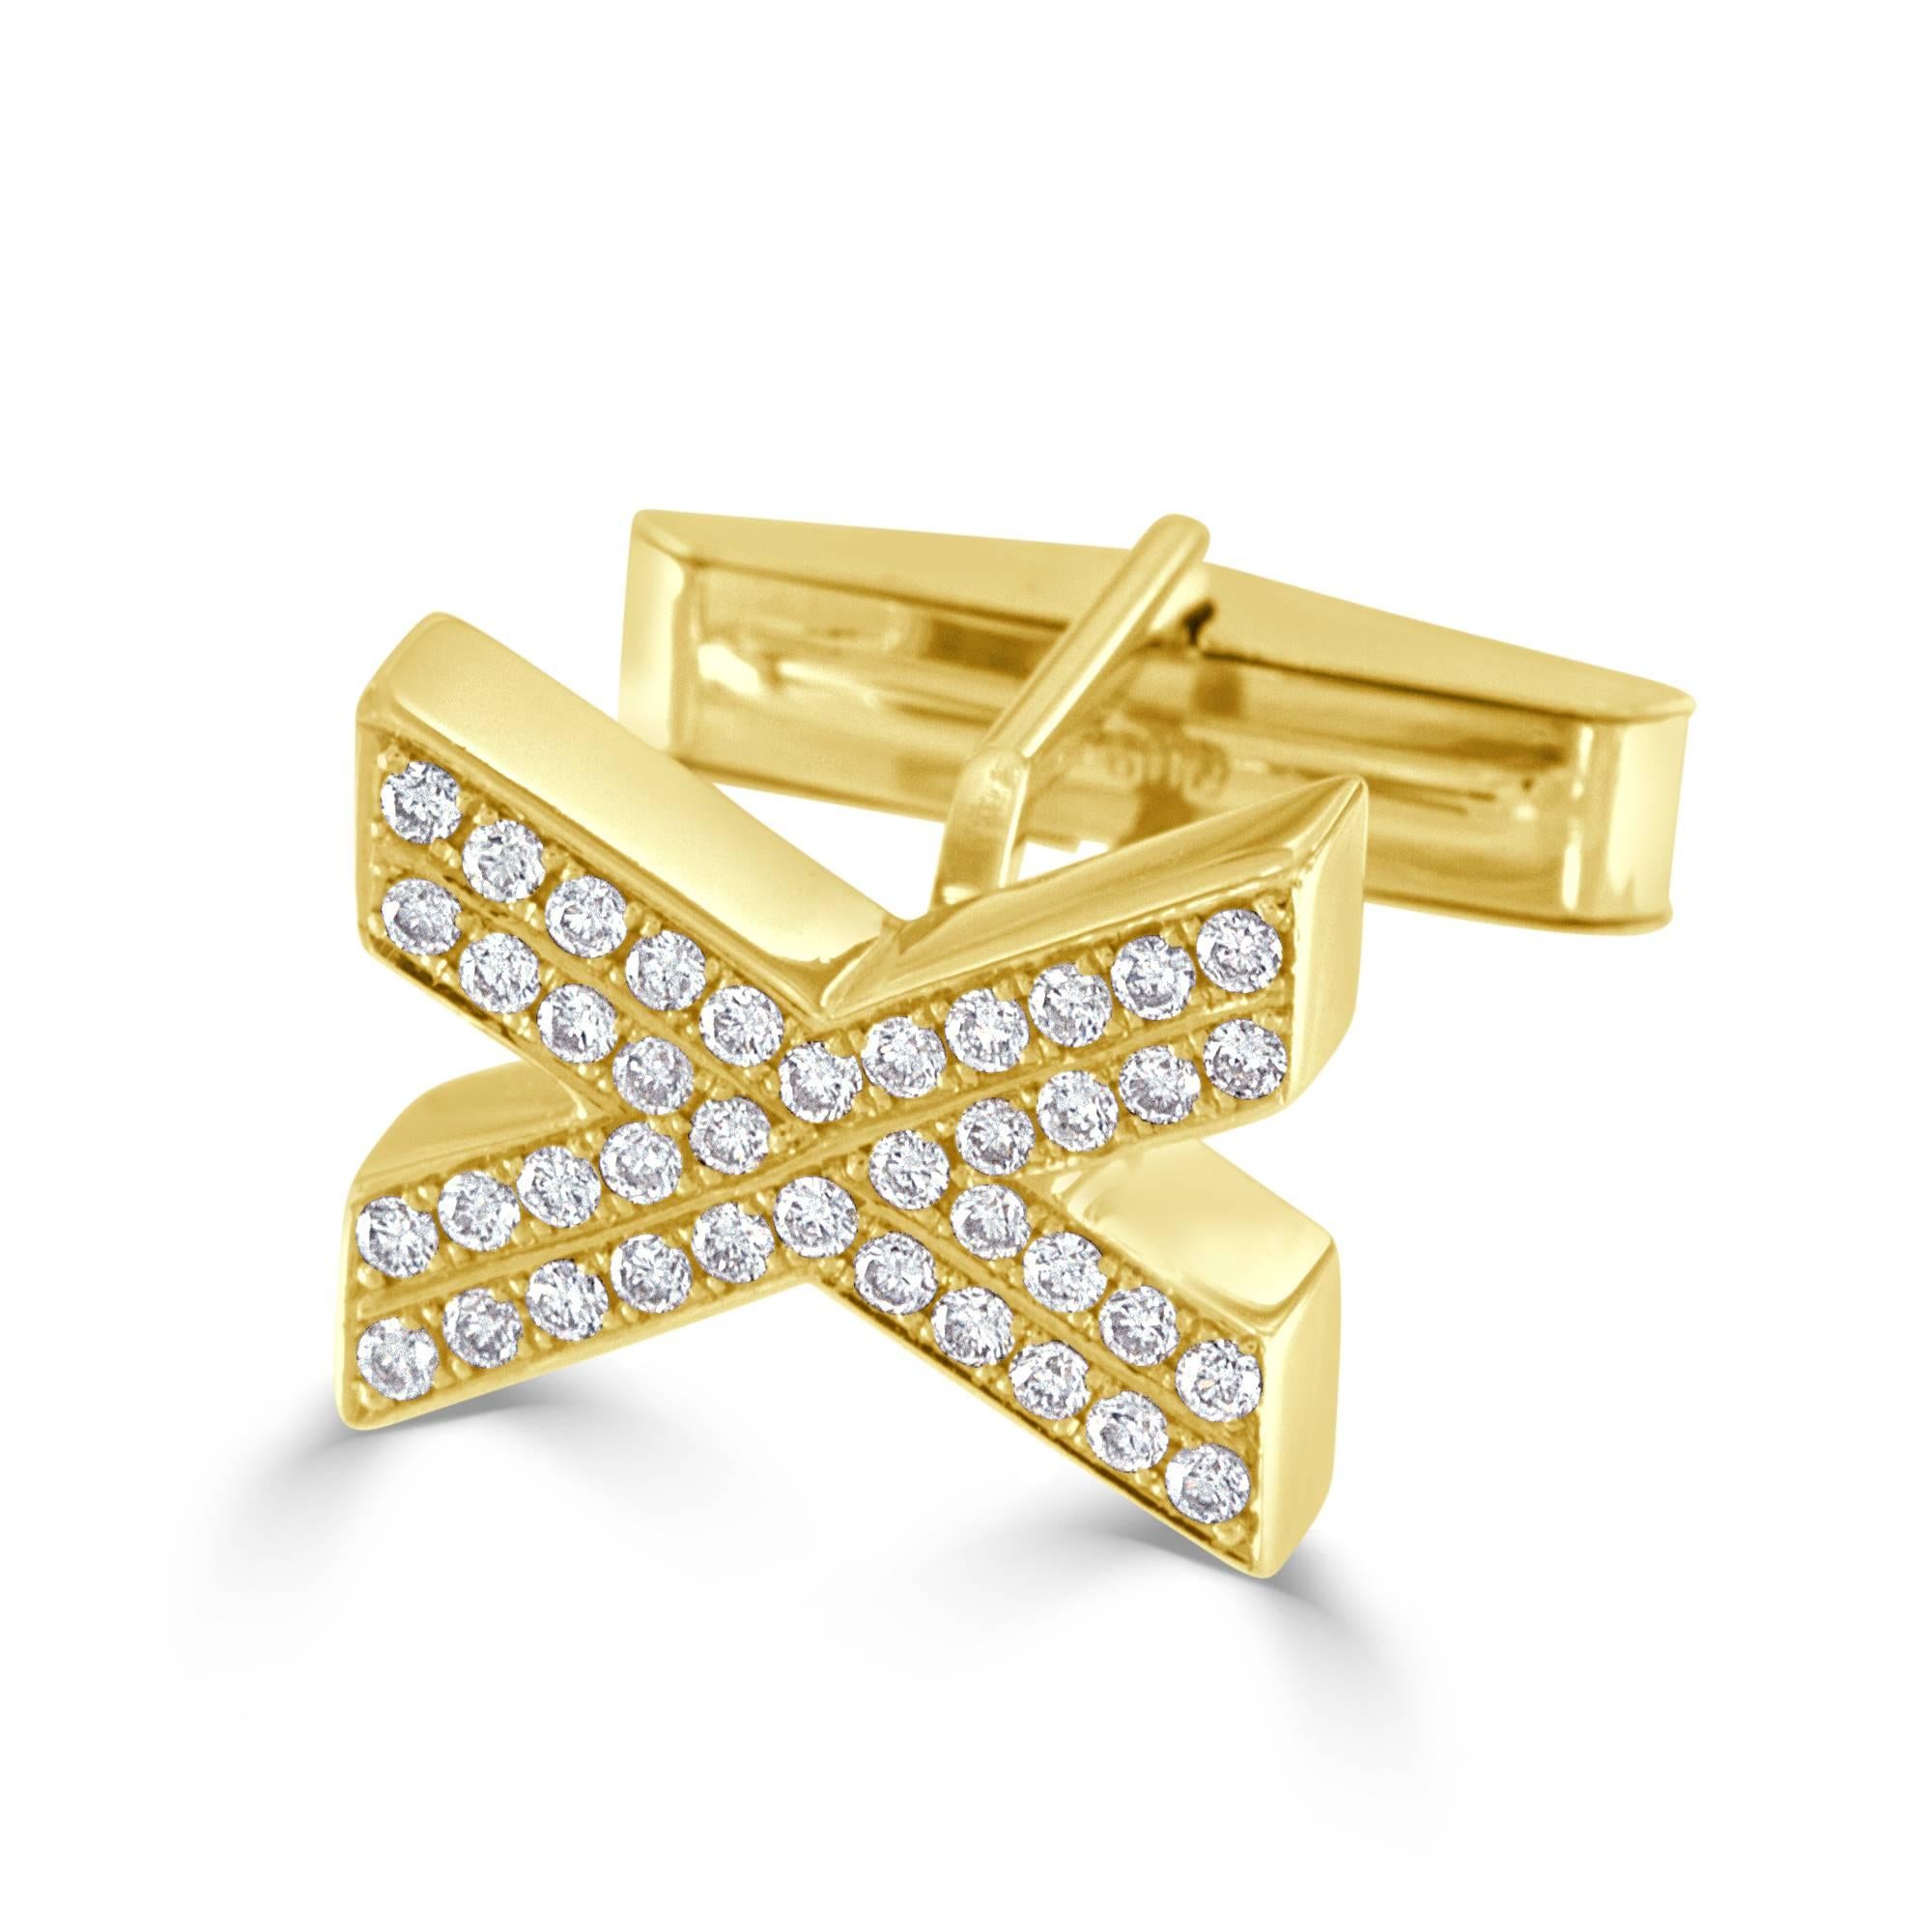 These gent's diamond cuff links featuring an X motif have 80- round brilliant cut diamonds weighing 1.07 carats total, having fine makes. Measuring 0.75 inch in length and 0.50 inch in width.  These handsome cuff links are 14 karat yellow gold,